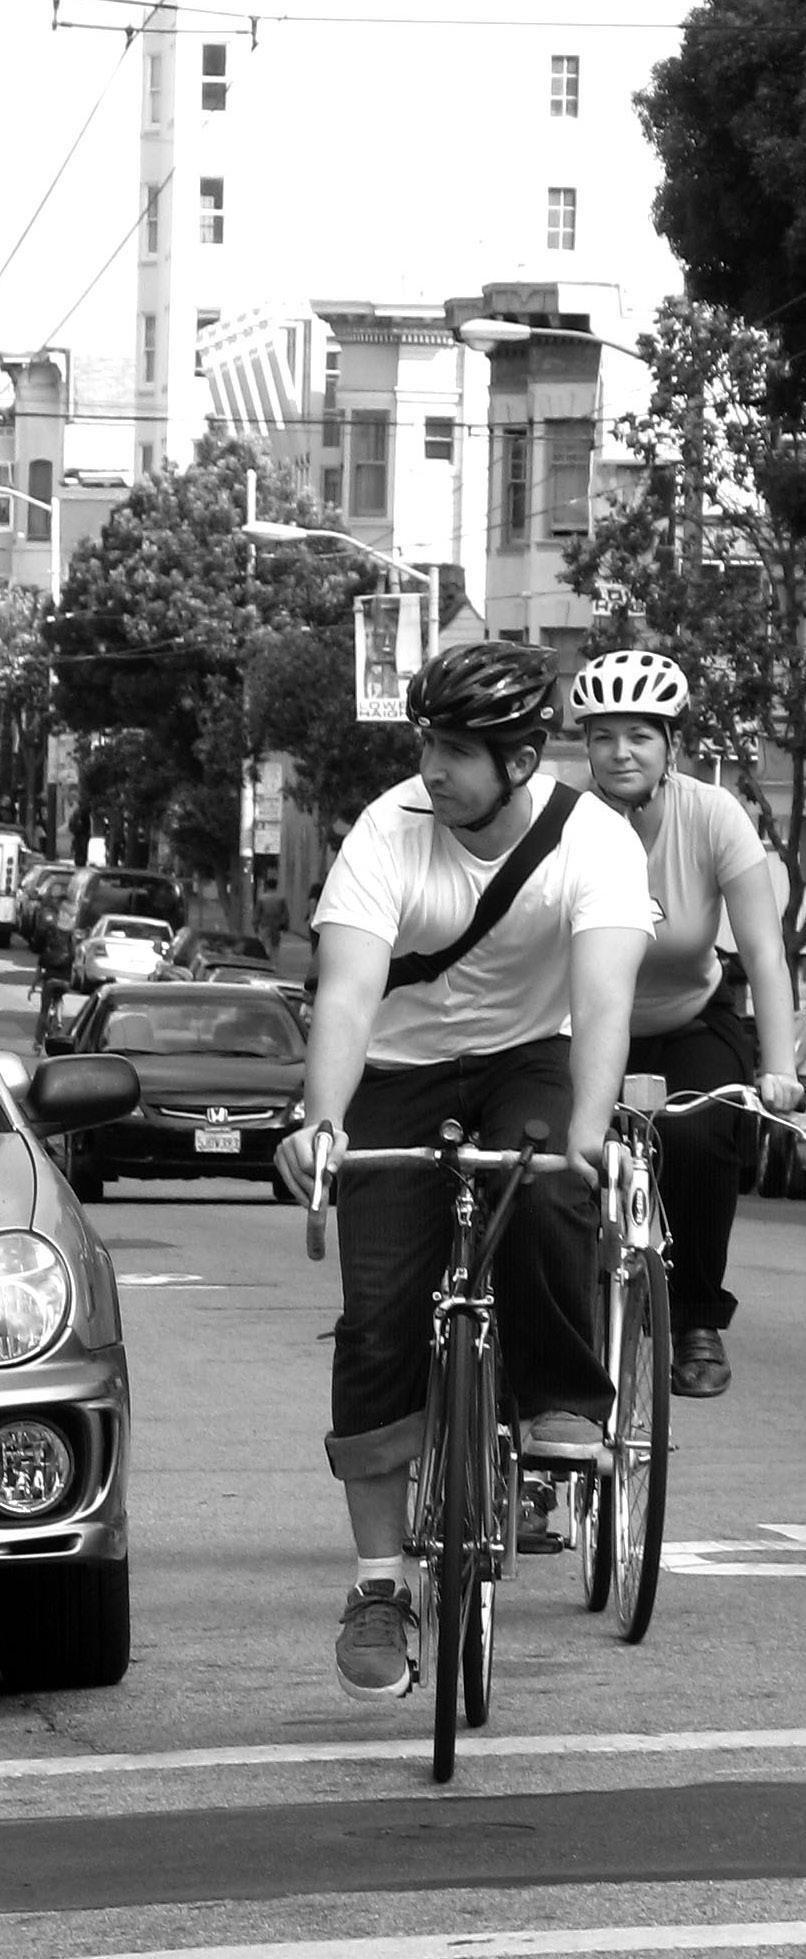 What predicts if one is a frequent bicyclist? Survey responses were analyzed to determine which factors might be statistically significant predictors of whether someone is a frequent bicyclist or not.